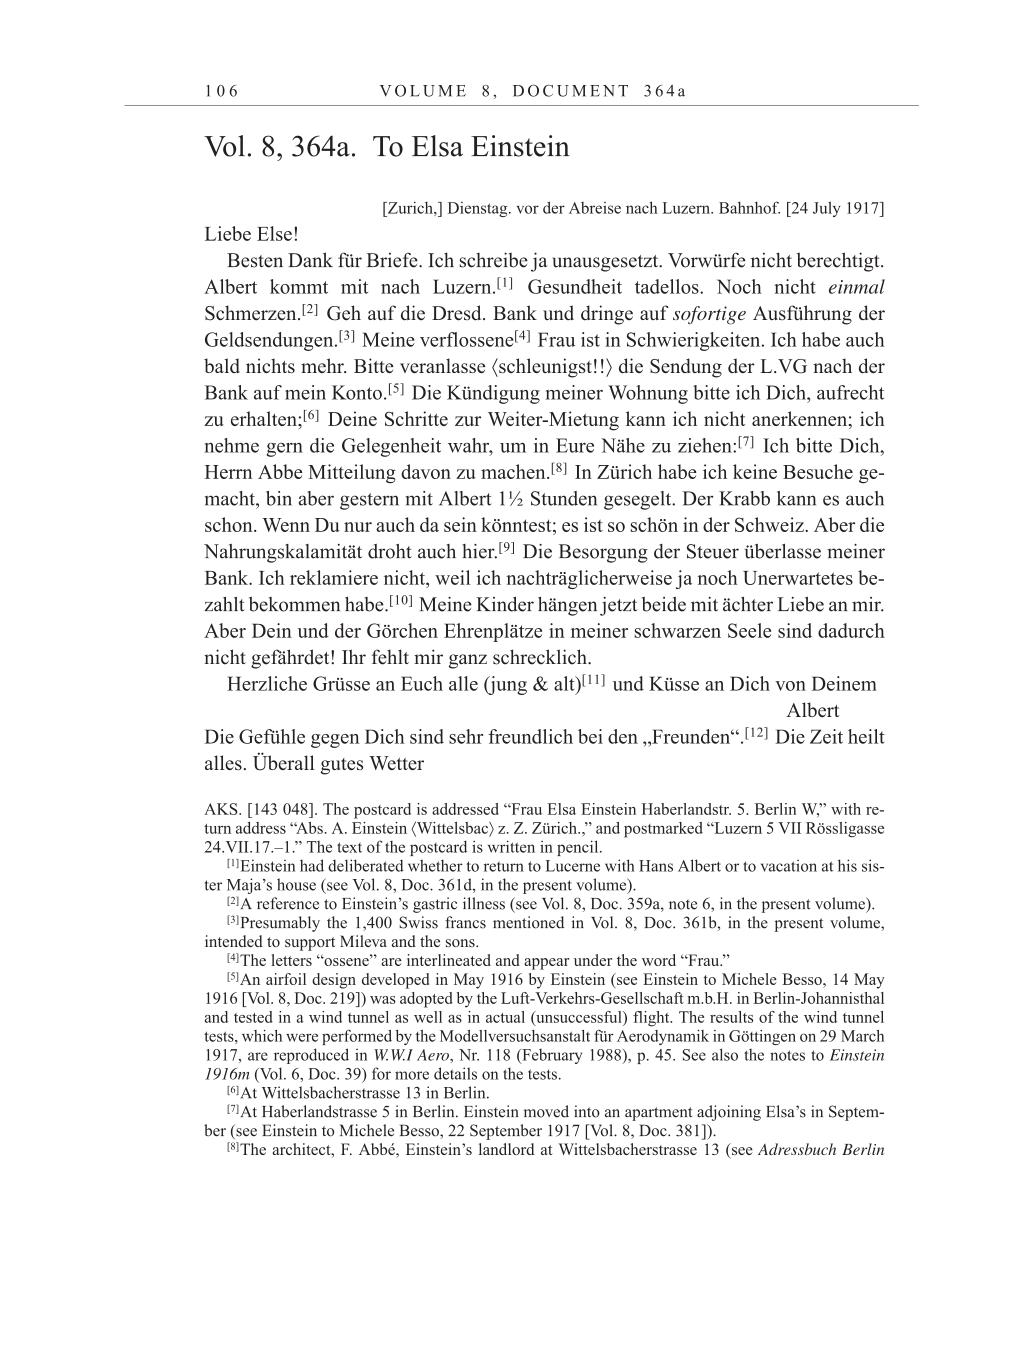 Volume 10: The Berlin Years: Correspondence May-December 1920 / Supplementary Correspondence 1909-1920 page 106